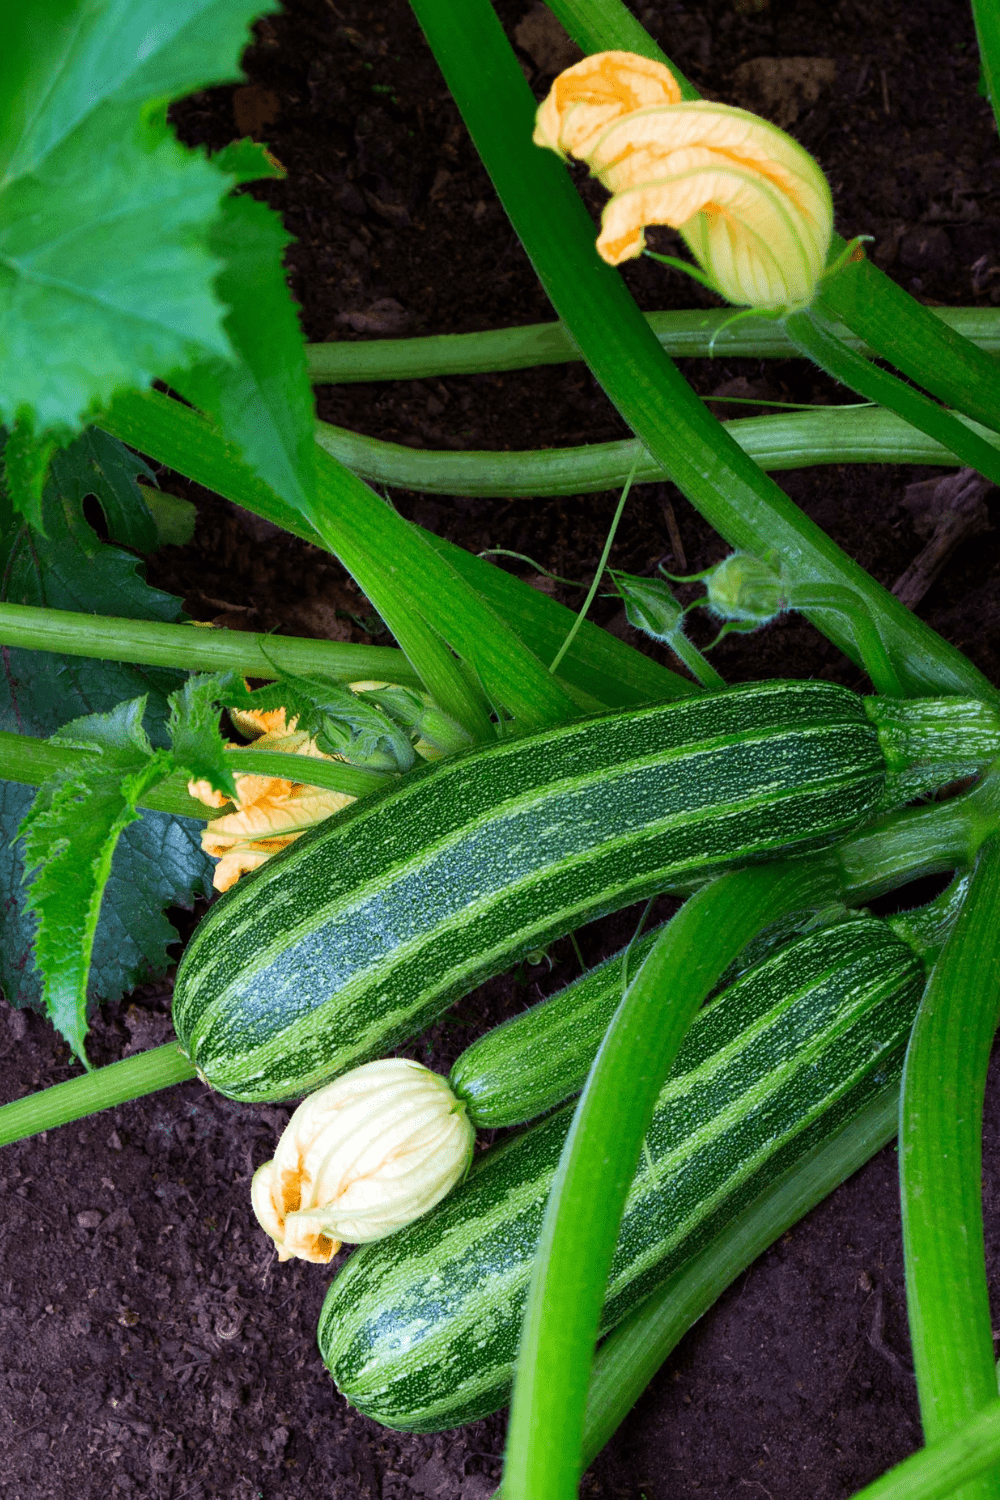 zucchini with blossoms